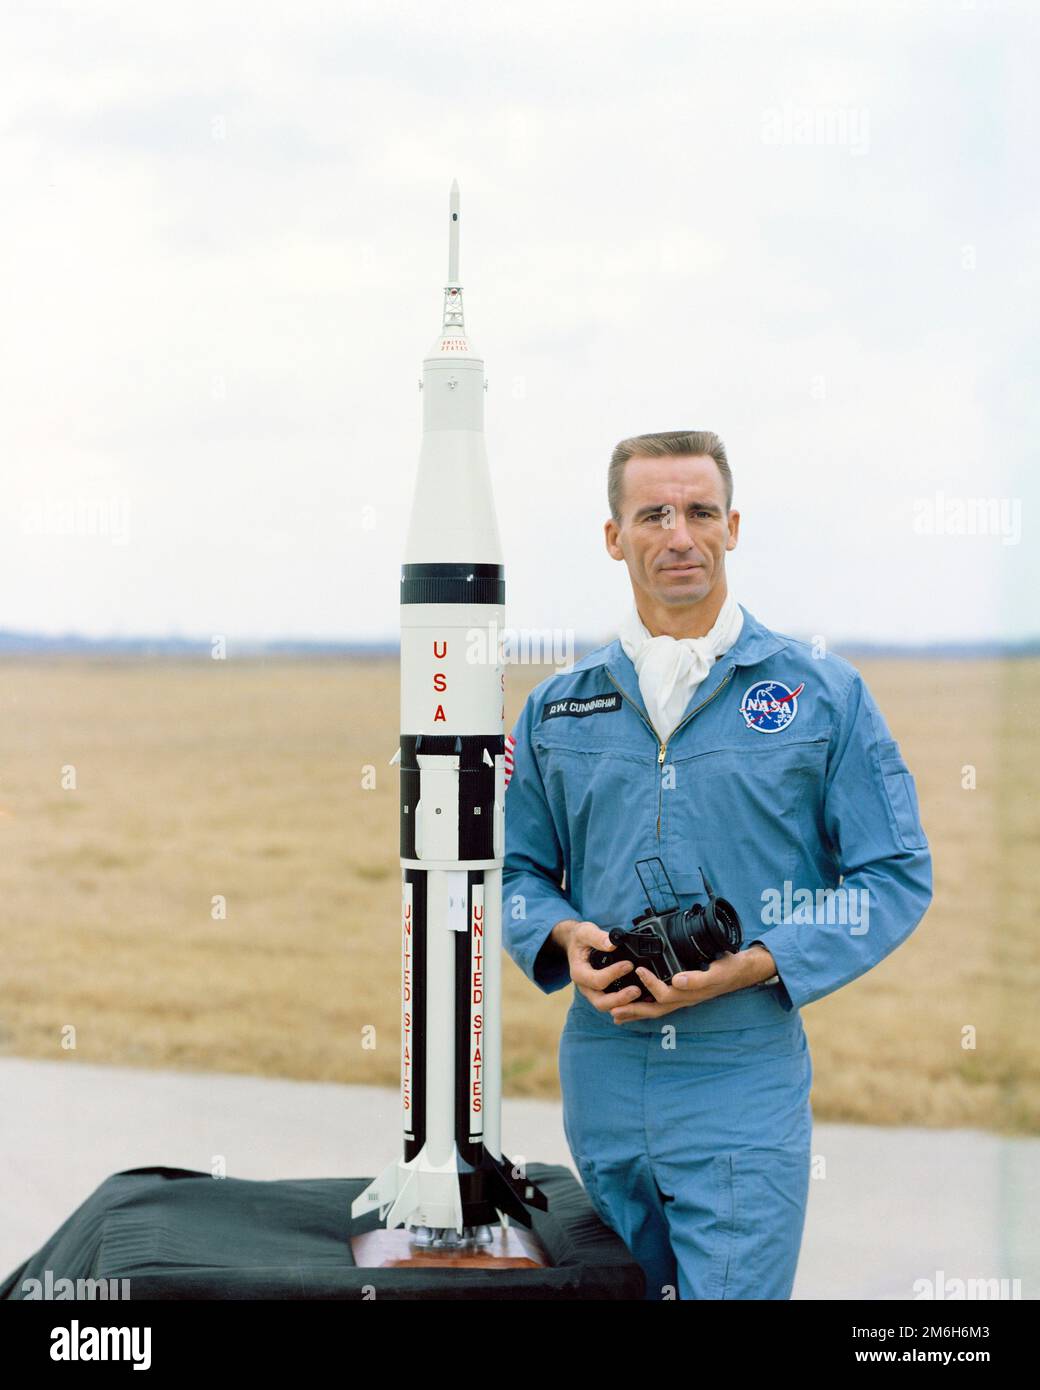 Cape Canaveral, United States. 13 February, 1968. NASA astronaut Walter Cunningham, lunar module pilot for the Apollo 7 mission poses with a model of the Apollo 7 Lunar Module and Saturn rocket ship at the Kennedy Space Center, February 13, 1968 in Cape Canaveral, Florida. Cunningham died January 4, 2023 at 90-years-old, the last surviving member of the NASA Apollo 7 mission. Stock Photo